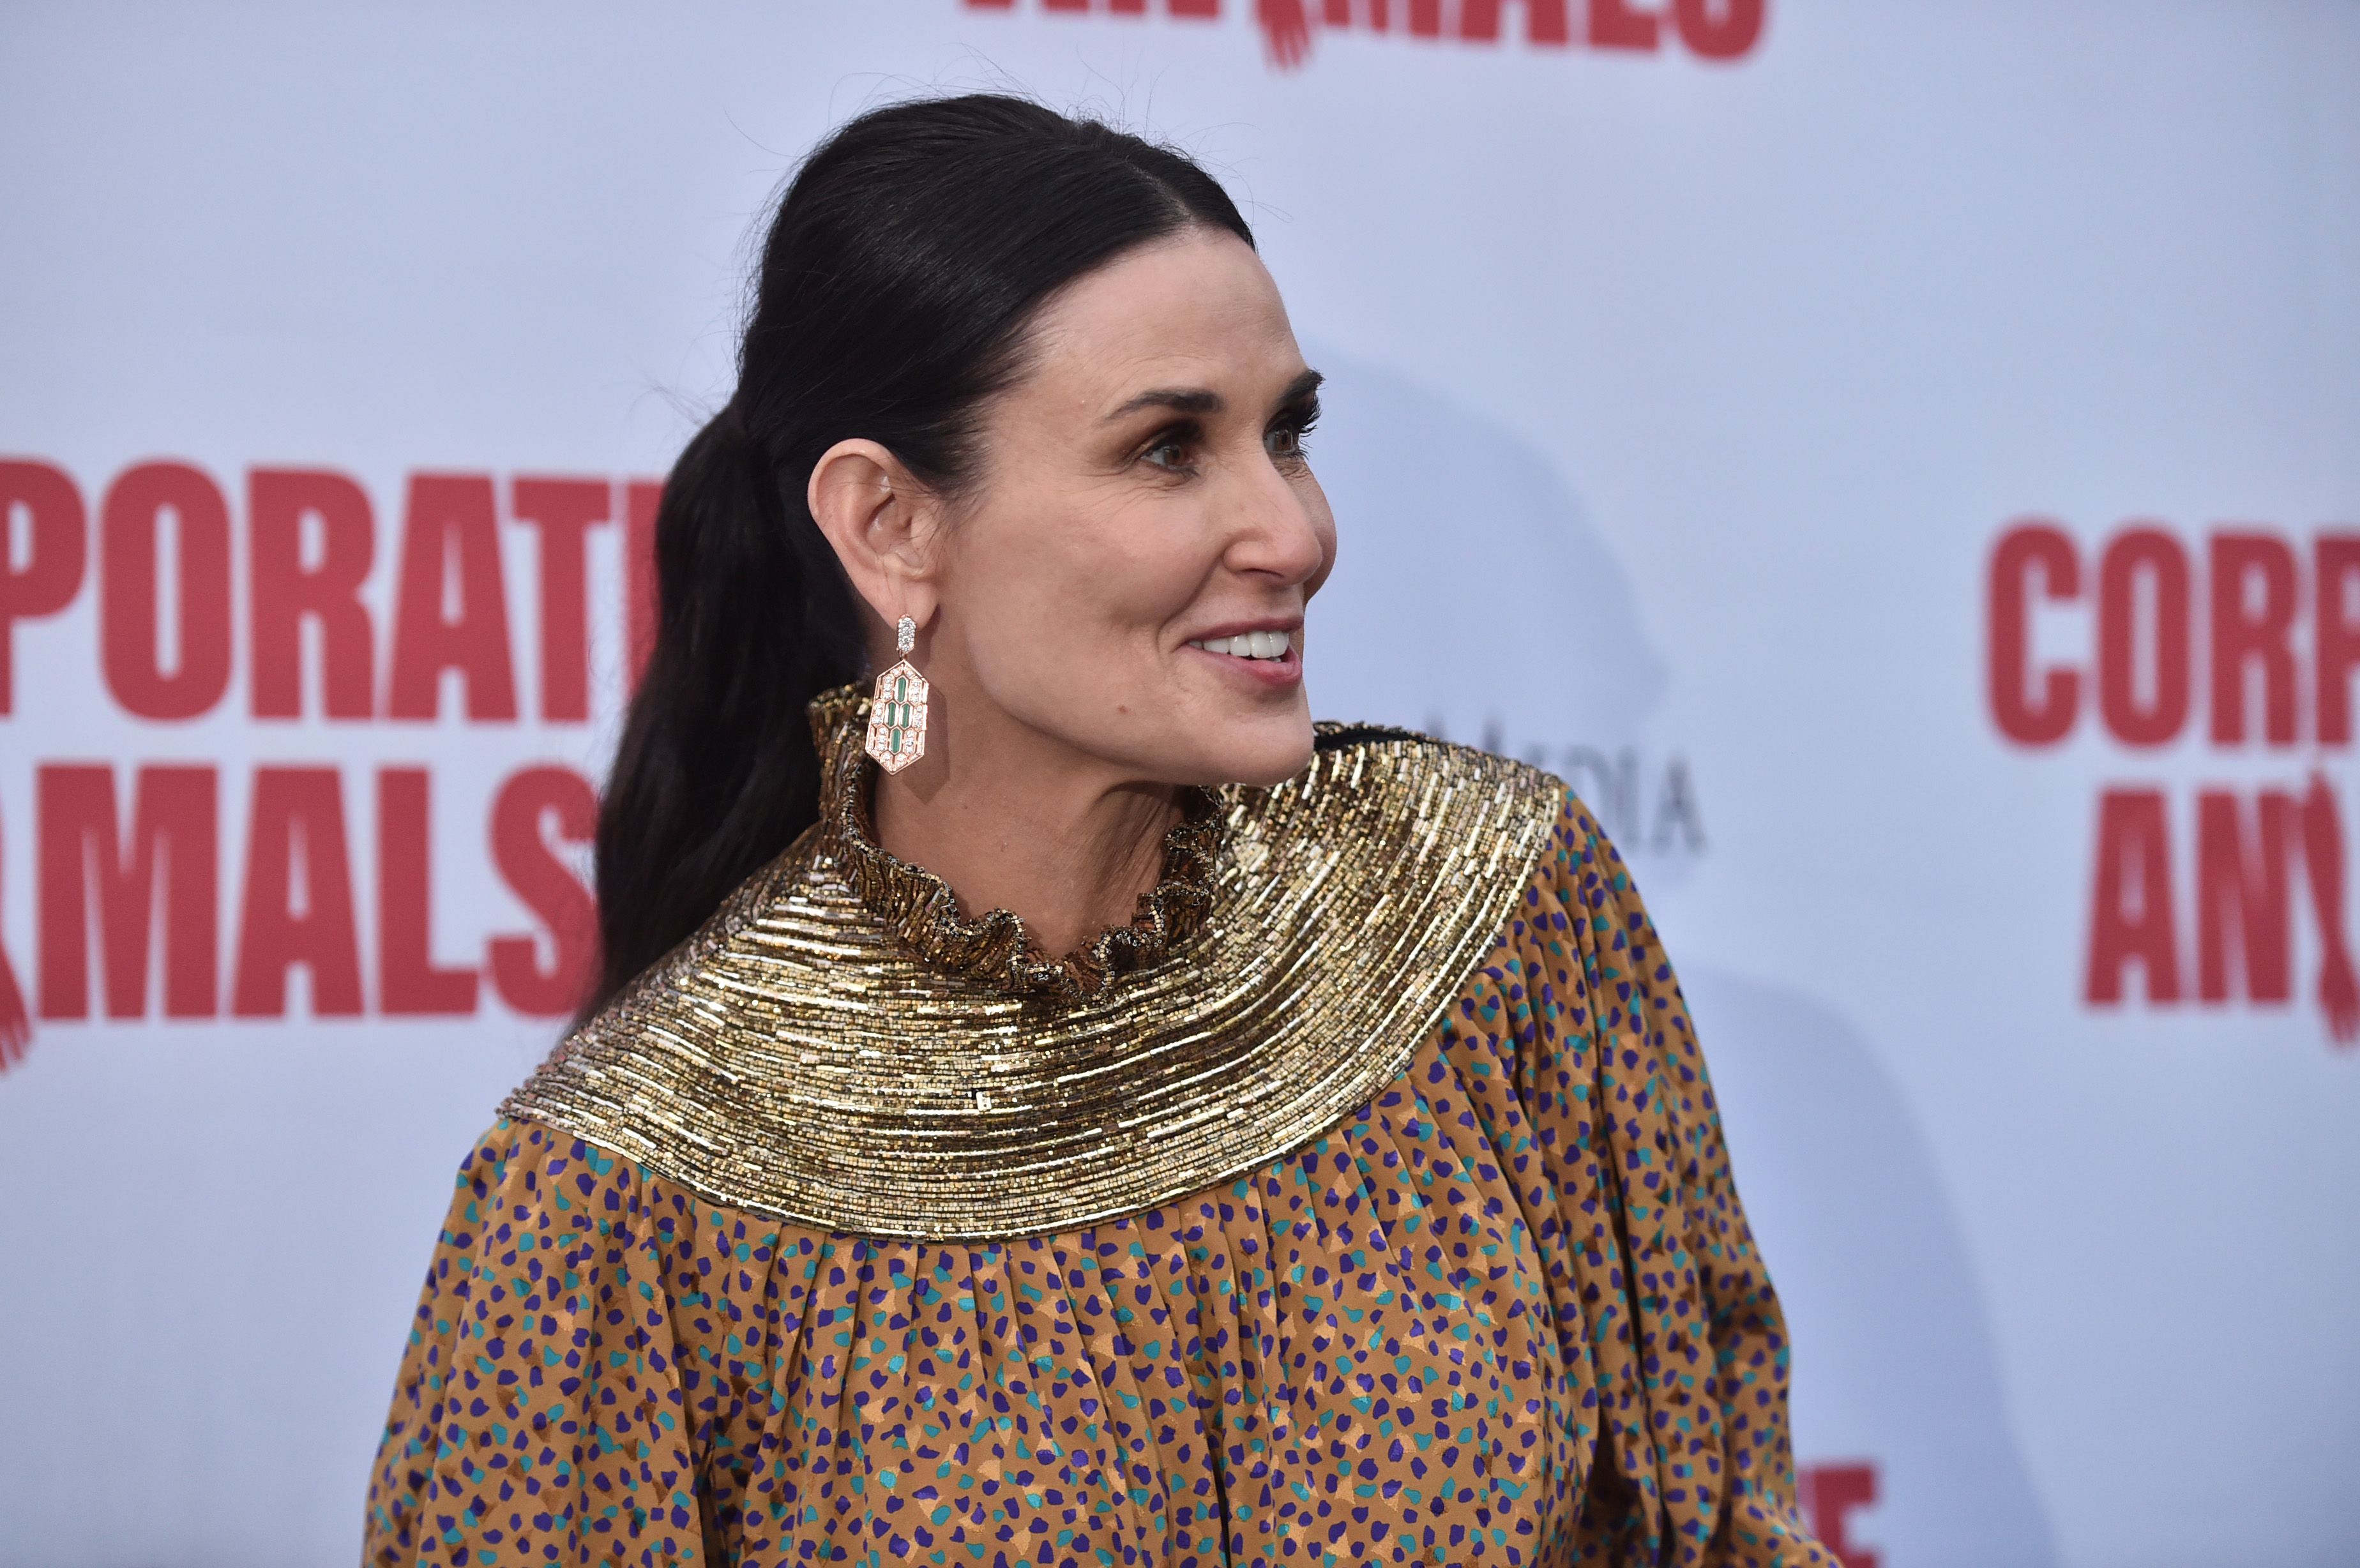 Demi Moore at the L.A. premiere of Screen Media's "Corporate Animals" at NeueHouse Los Angeles on September 18, 2019 | Photo: Getty Images